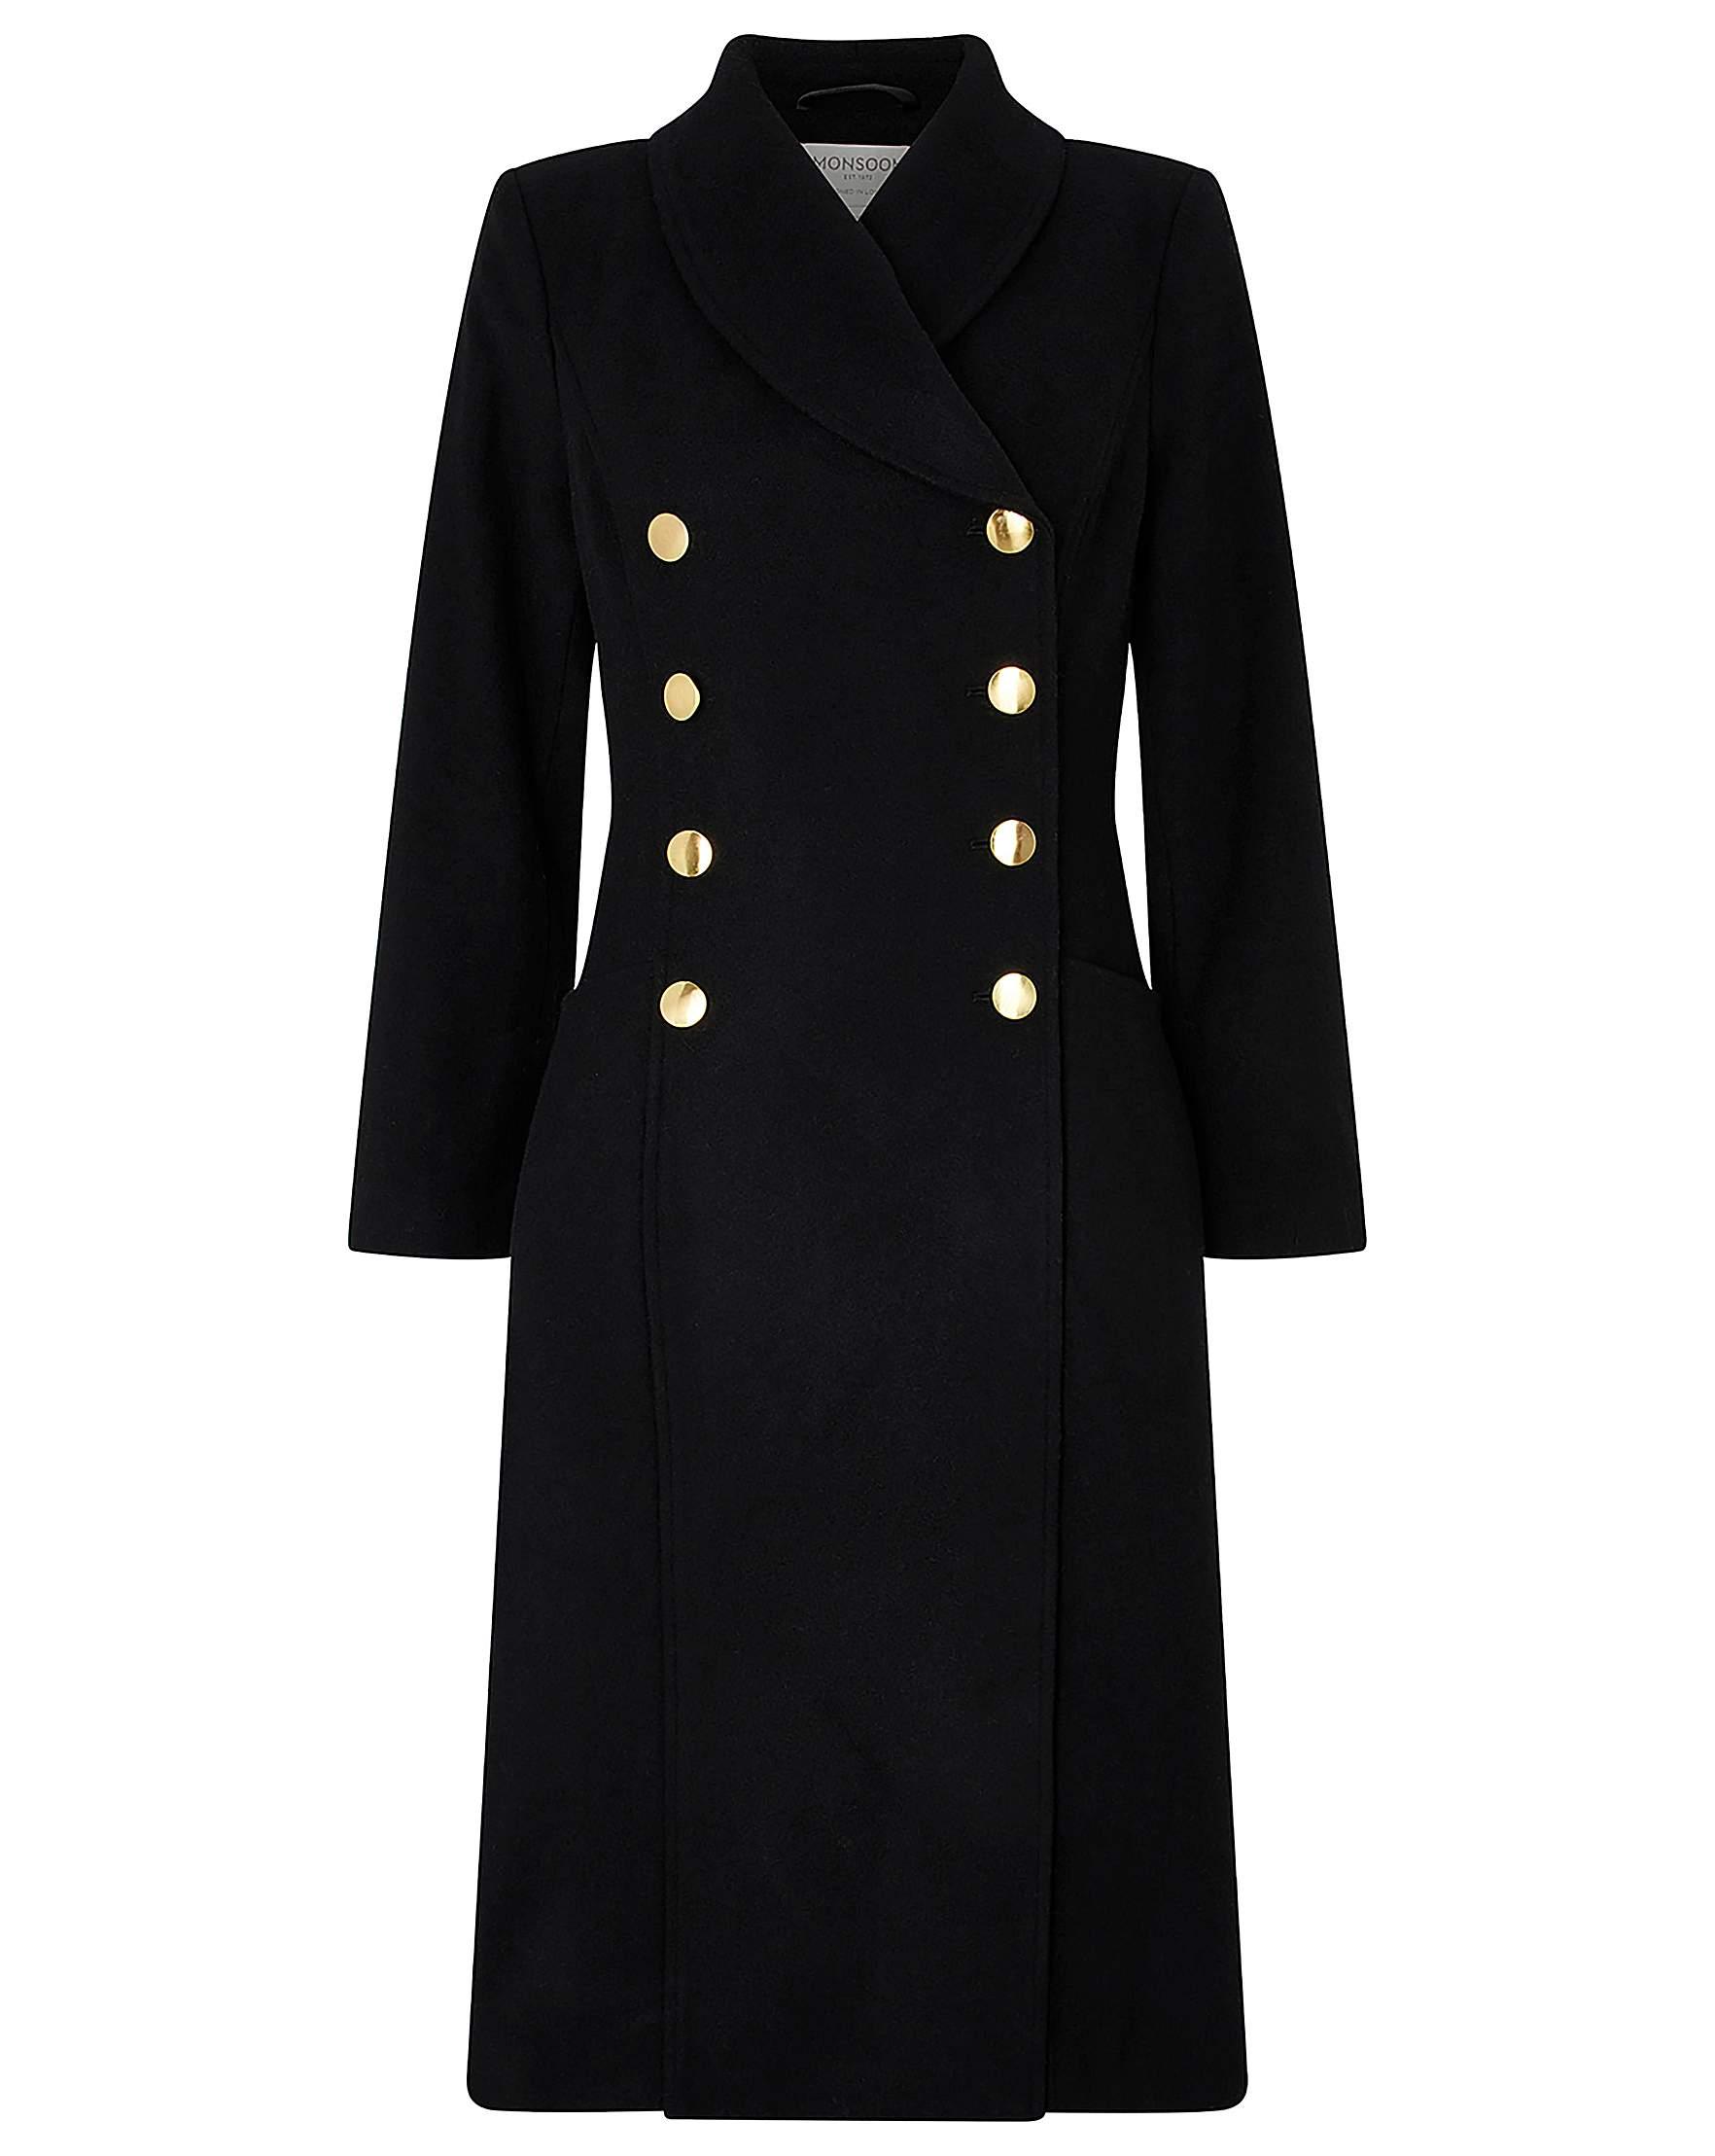 Monsoon Wool Rosalie Fit And Flare Coat in Black - Lyst